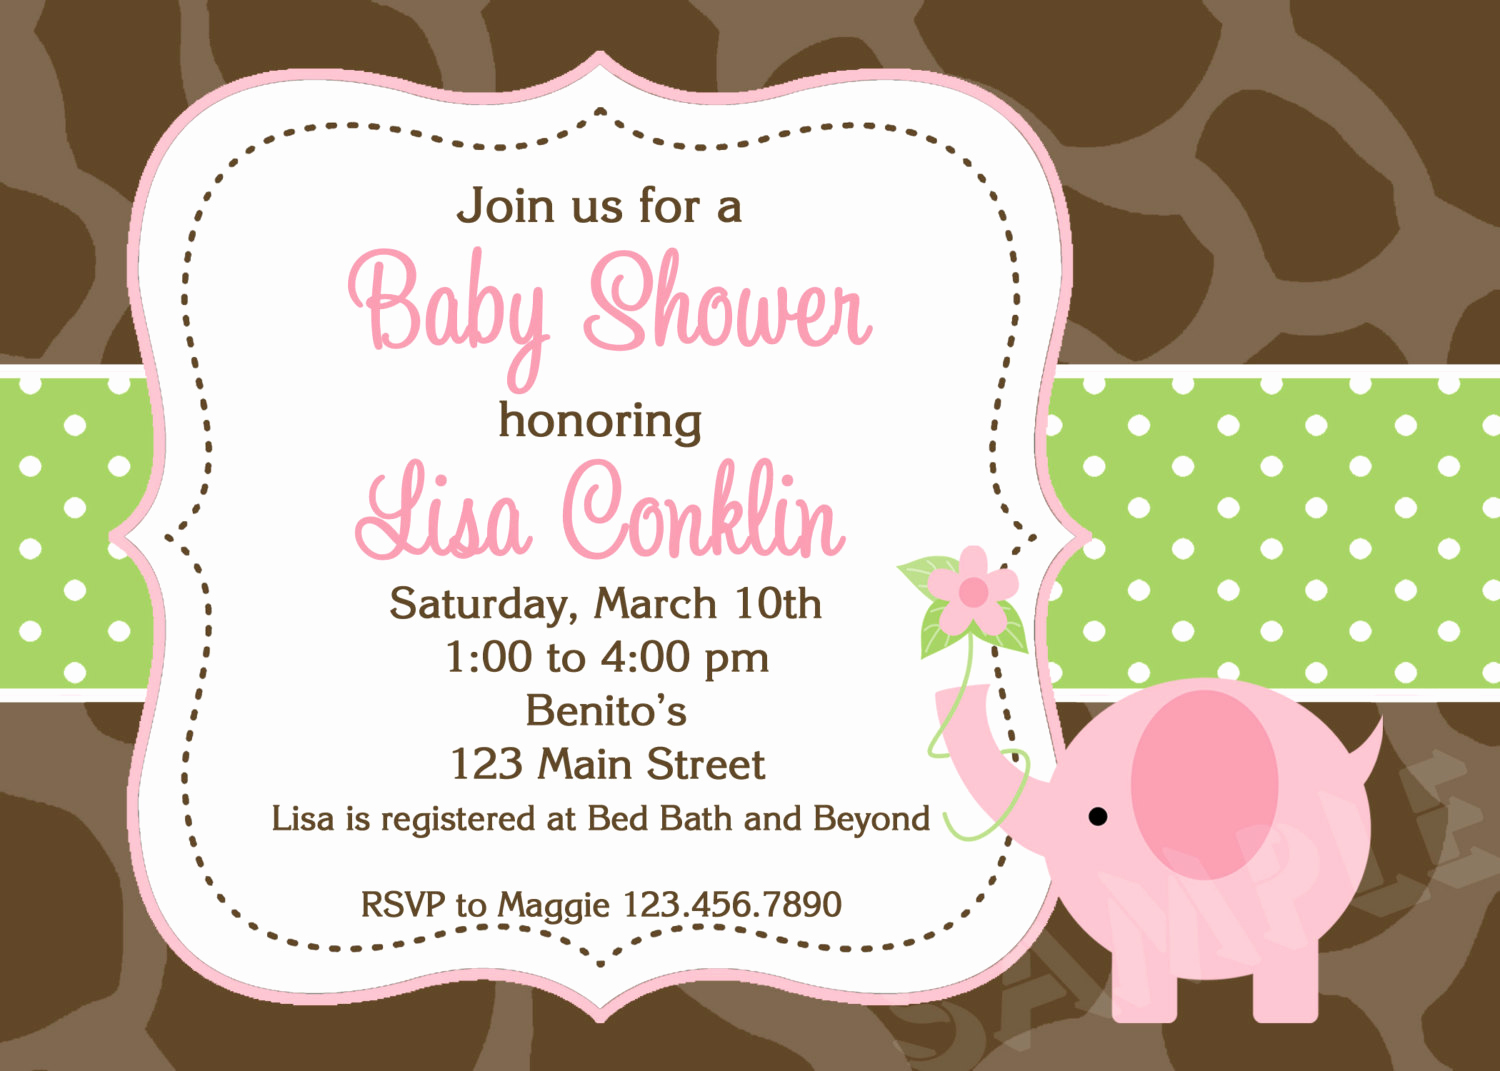 Baby Shower Invitation Images Luxury Couples Baby Shower Invitations Pink and Gray Elephant